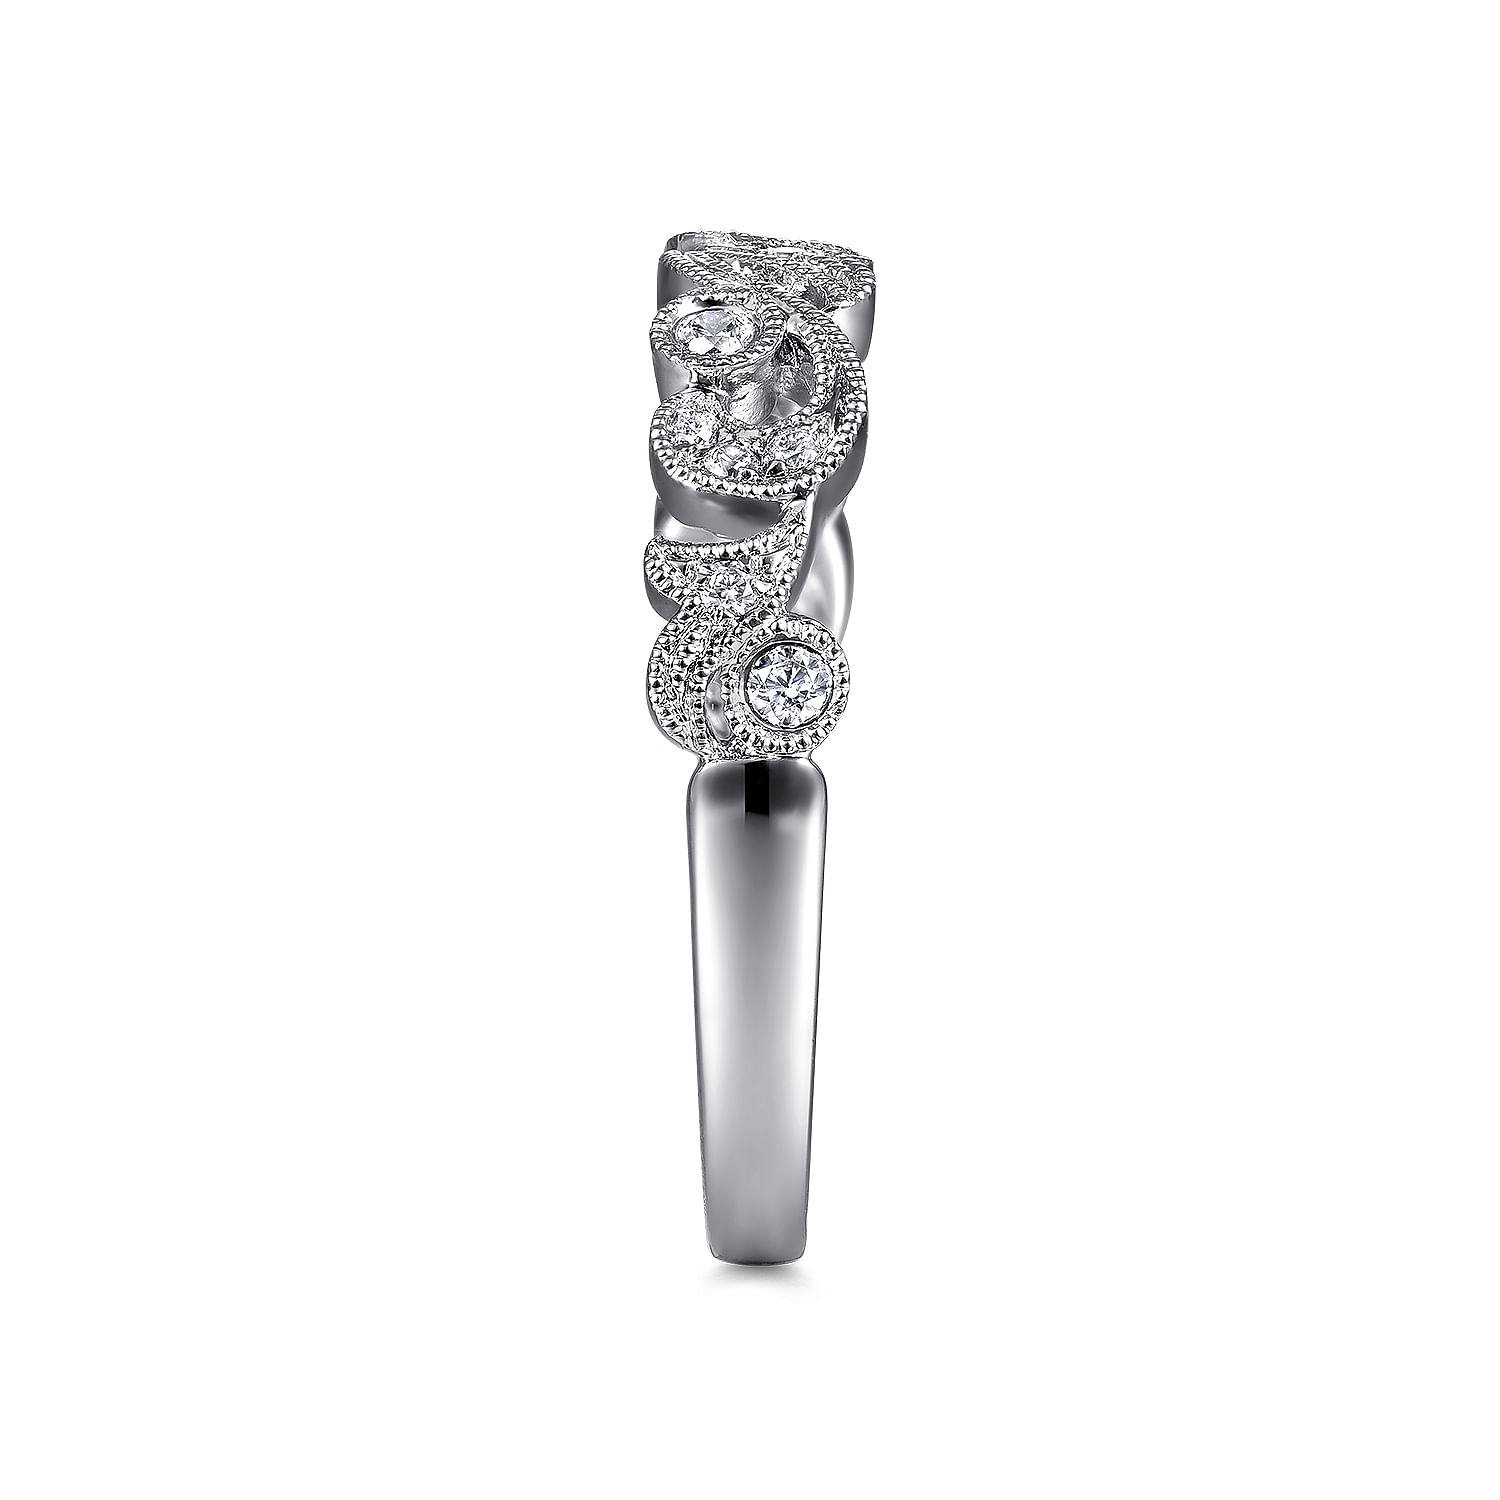 Floral 14K White Gold Diamond Anniversary Band with Millgrain